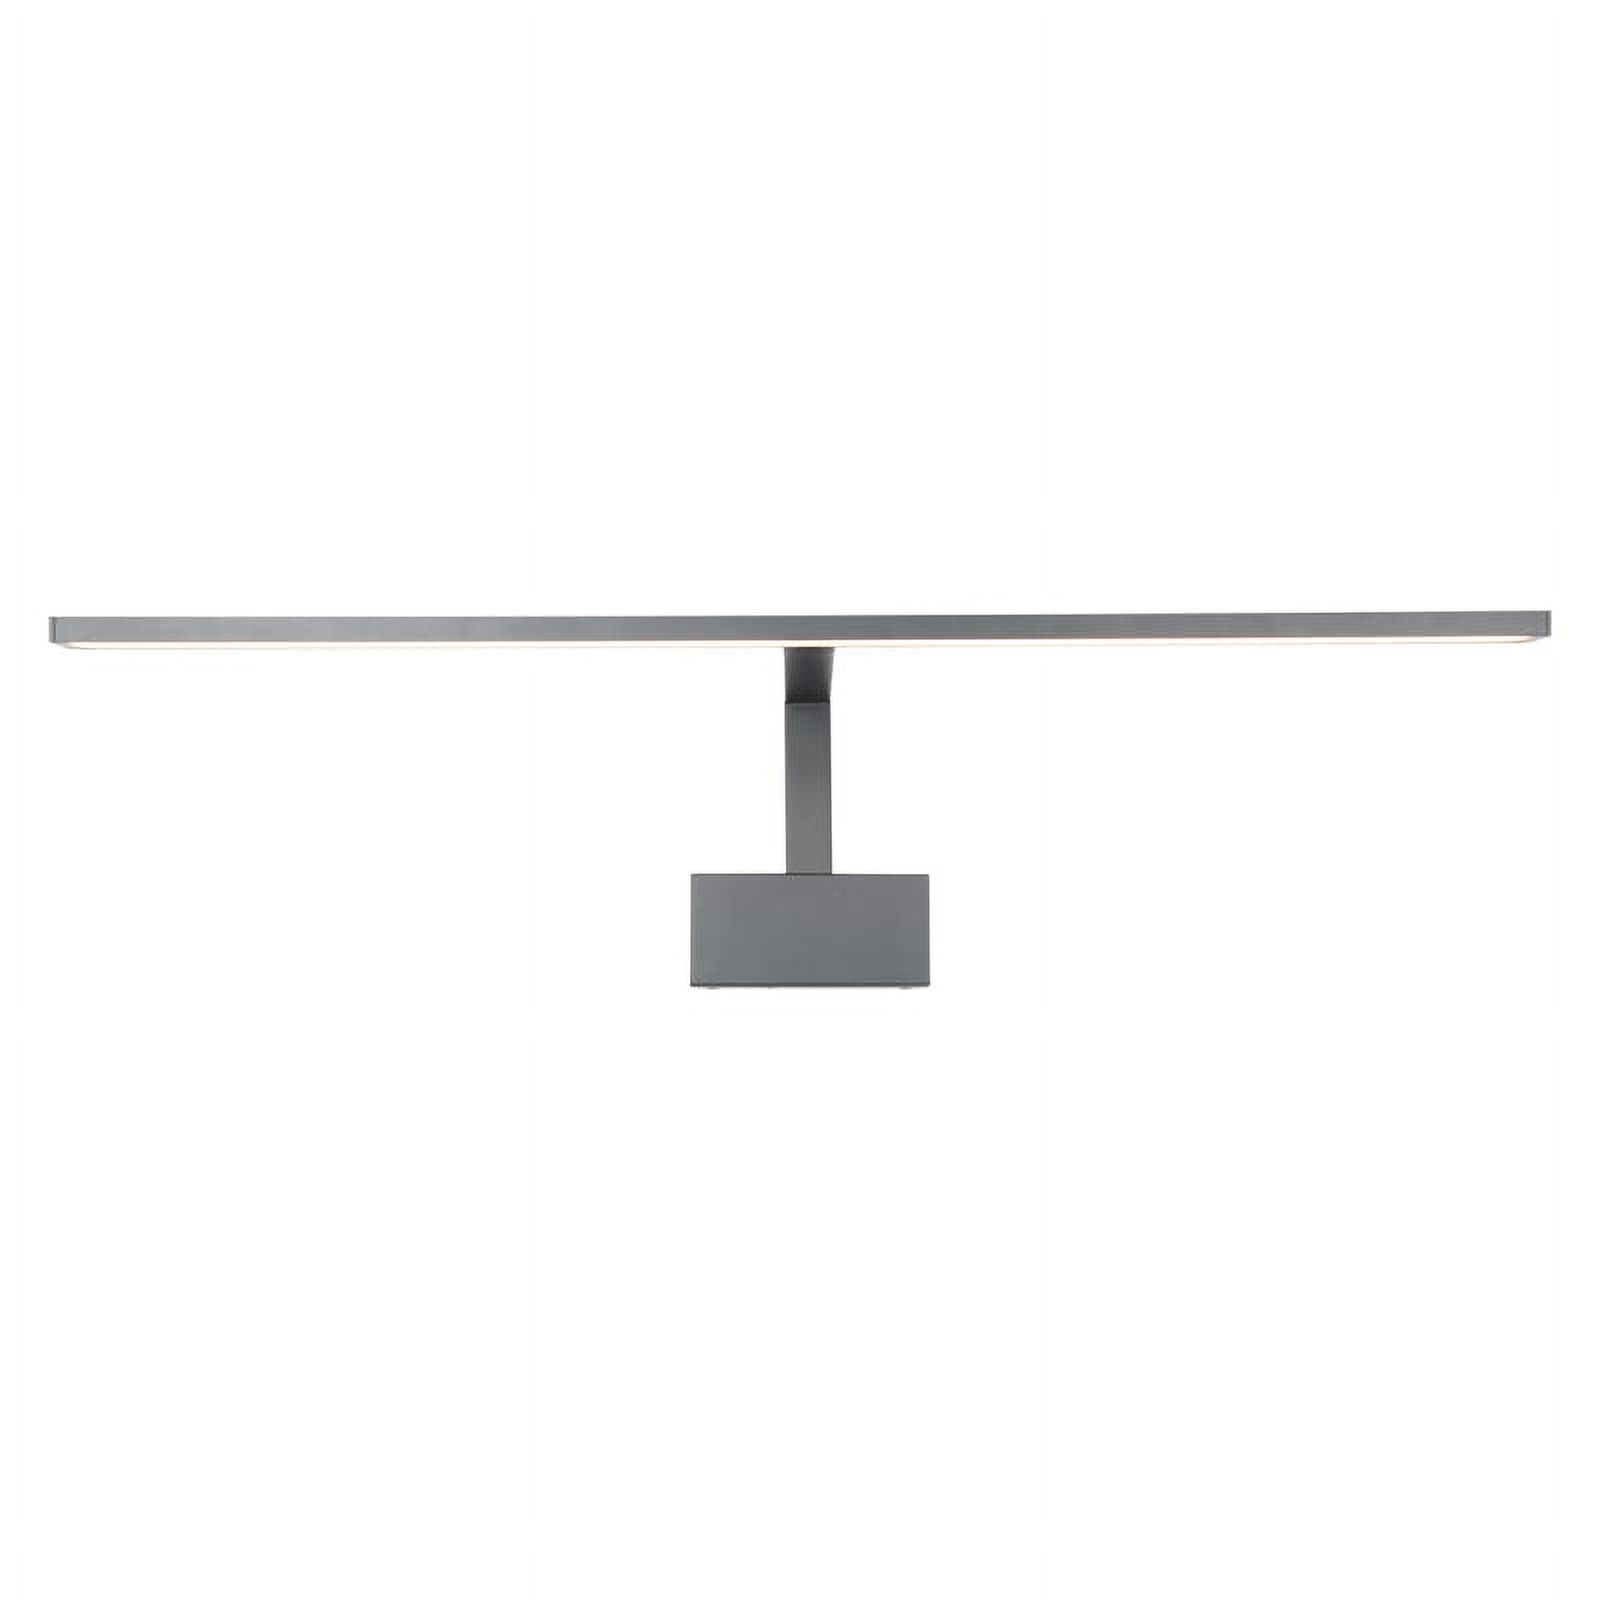 WAC Lighting Uptown 25" LED Adjustable Aluminum Picture Light in Brushed Nickel - image 3 of 5